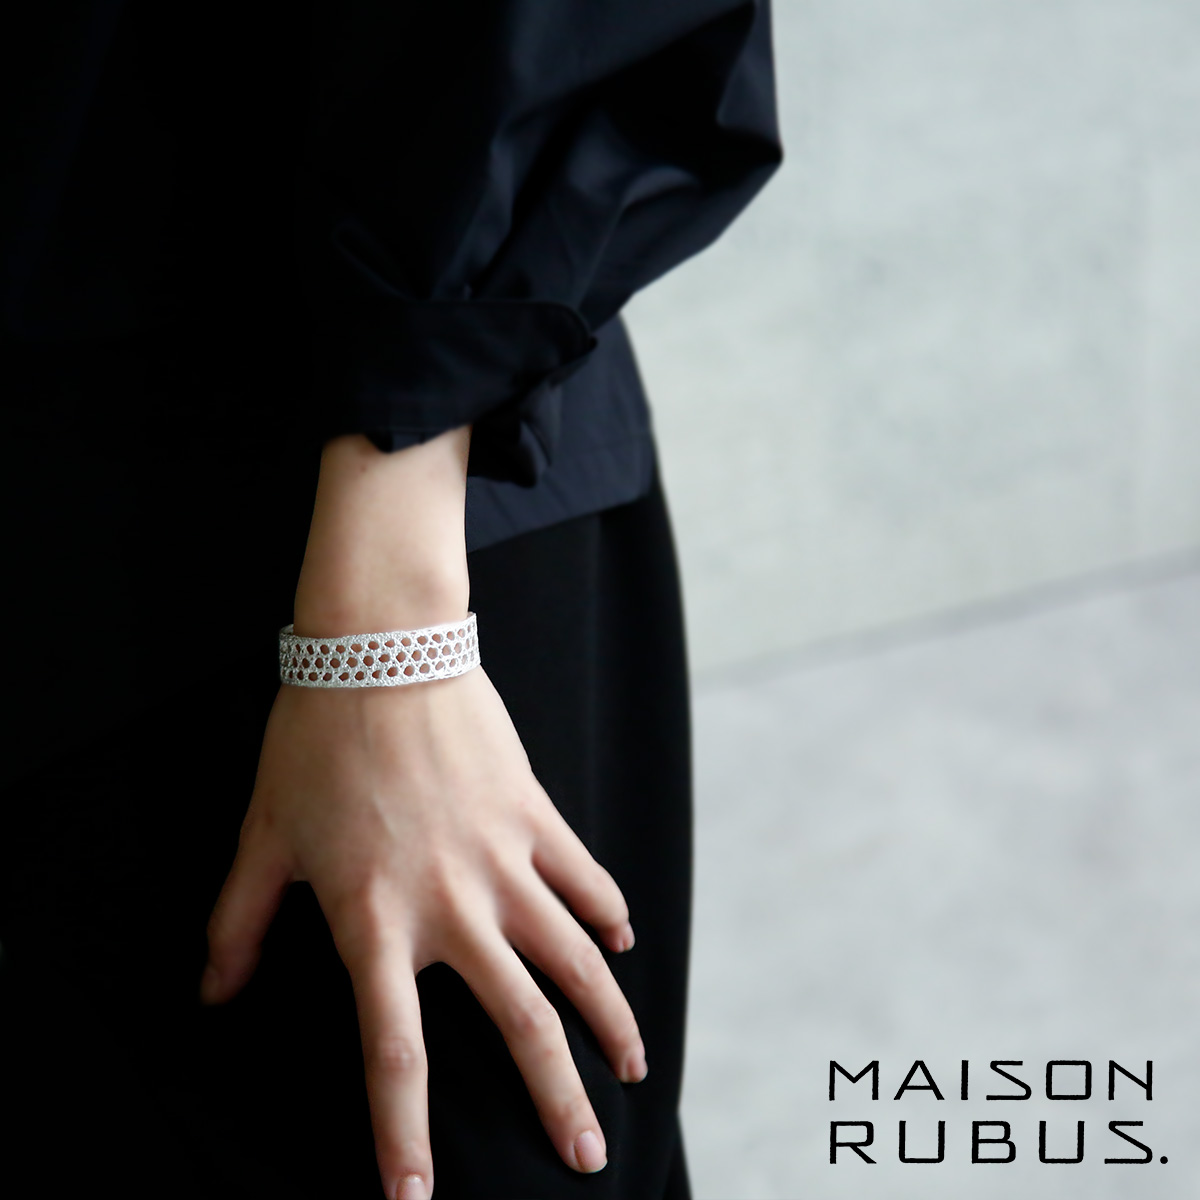 MAISON RUBUS.(][oX)RNV Vo[ [X oO L grecollection lace bangle Lh re-002